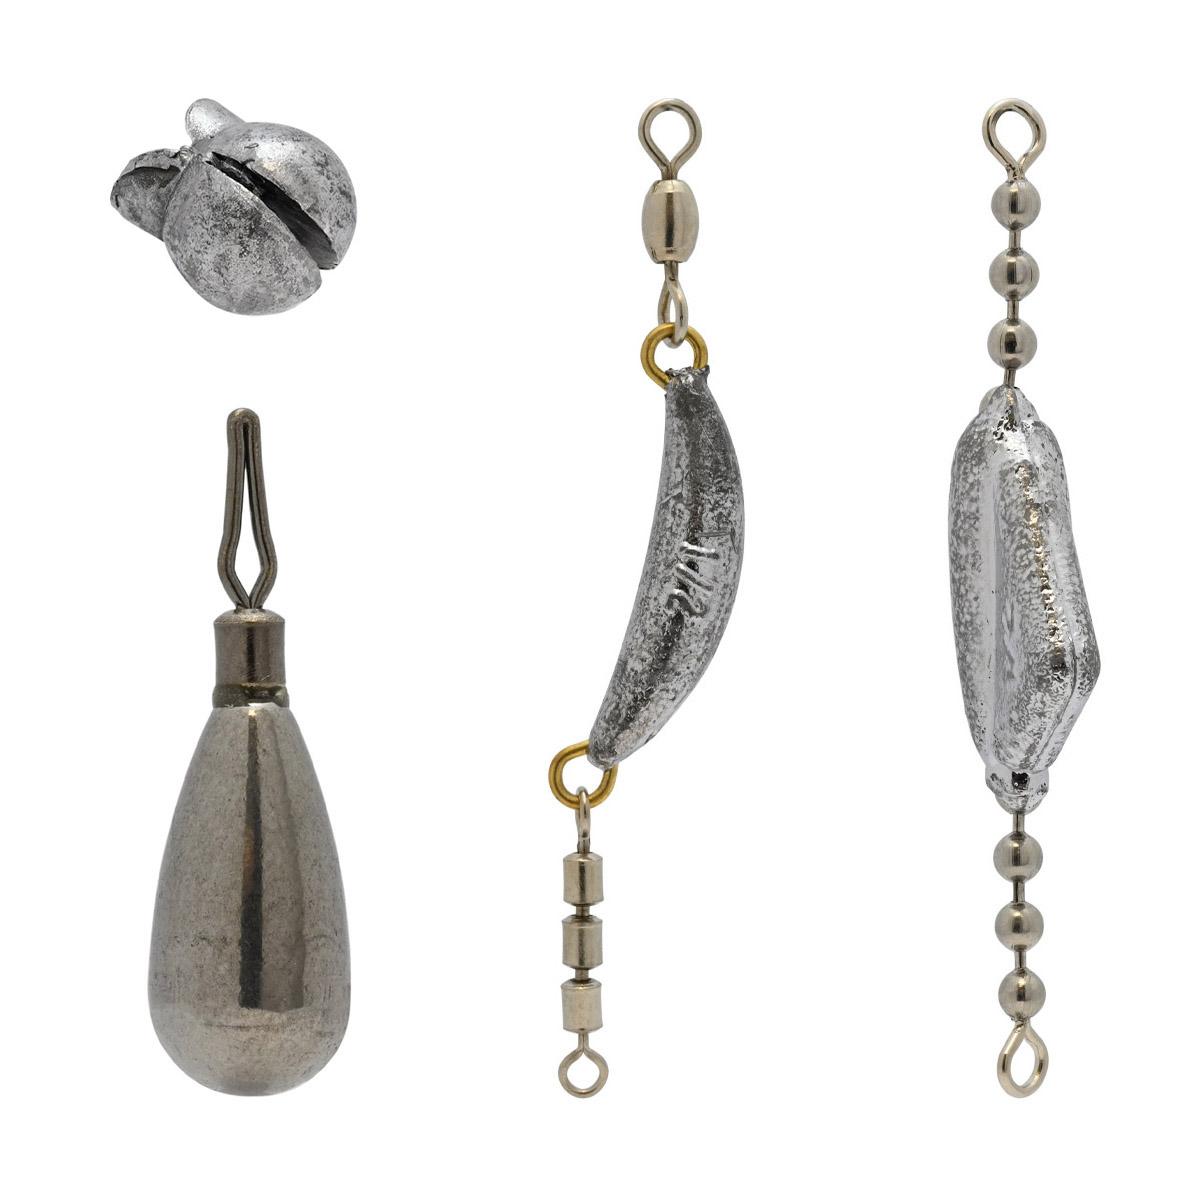 Sinkers, Fishing Weights